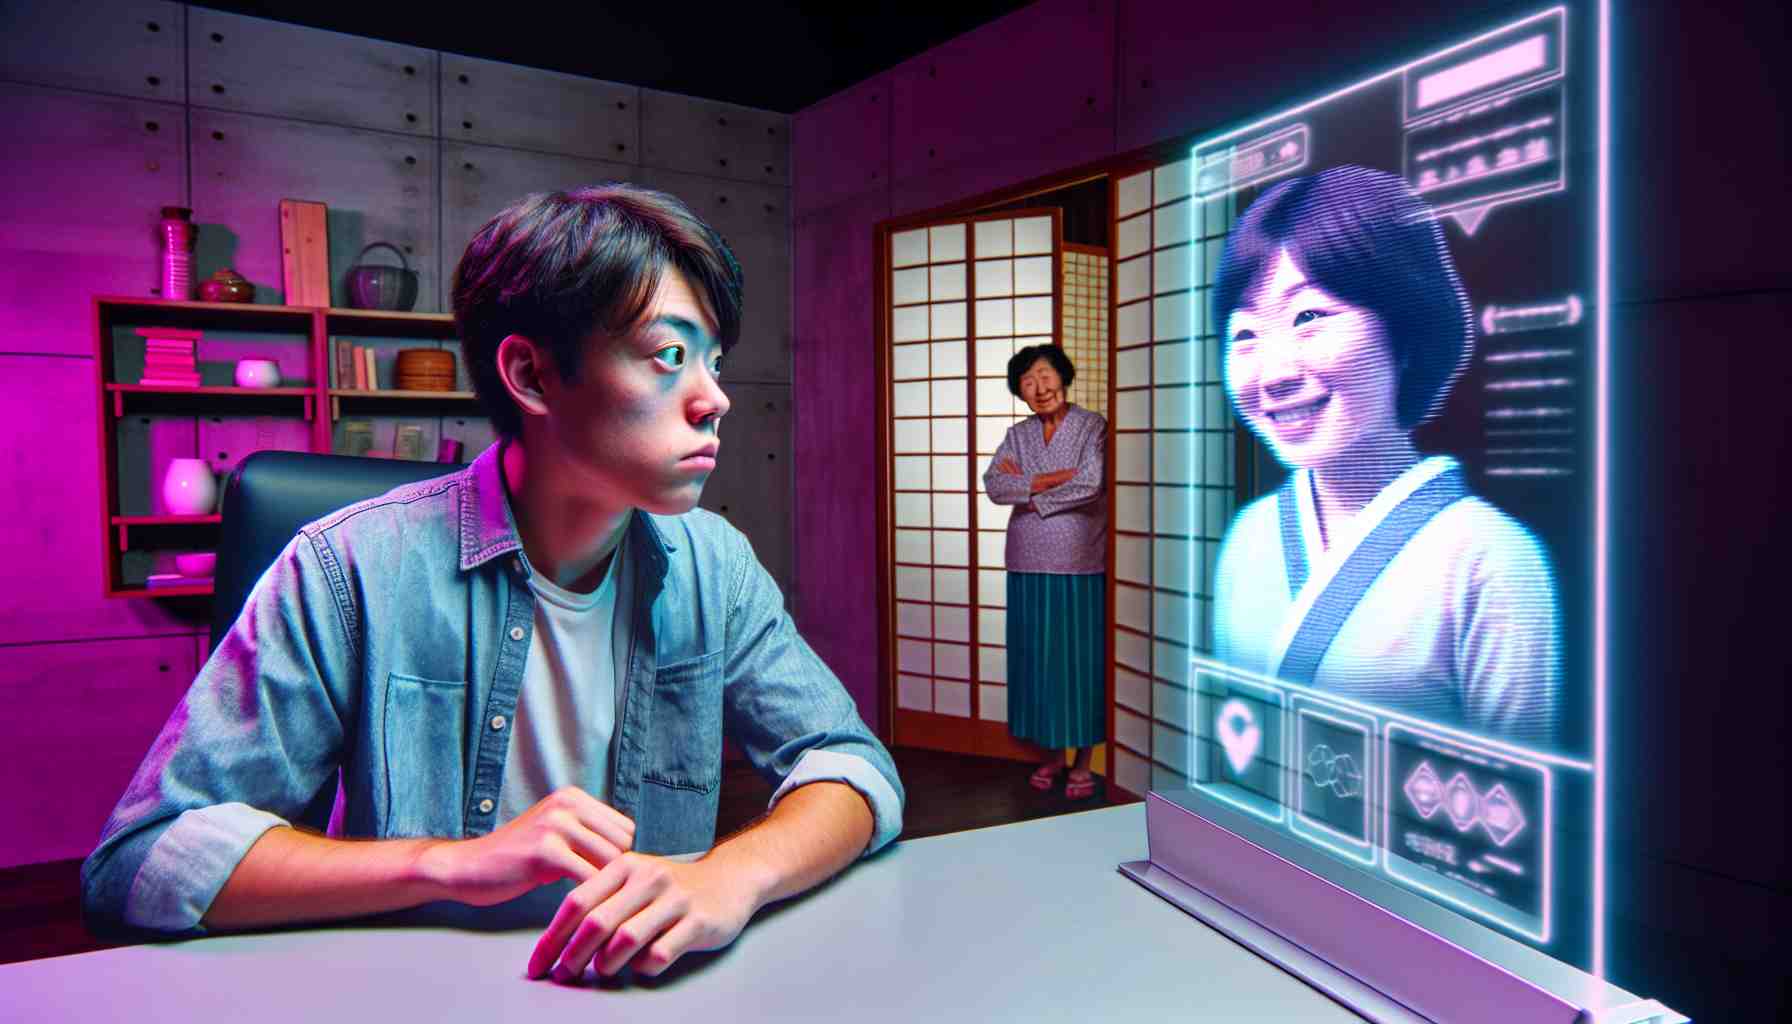 Uncover if 'ai girlfriend' tech is love's new disruptor or merely a digital scapegoat? Are they sparking divorces or just reflecting society's evolving needs? Discover the truth.